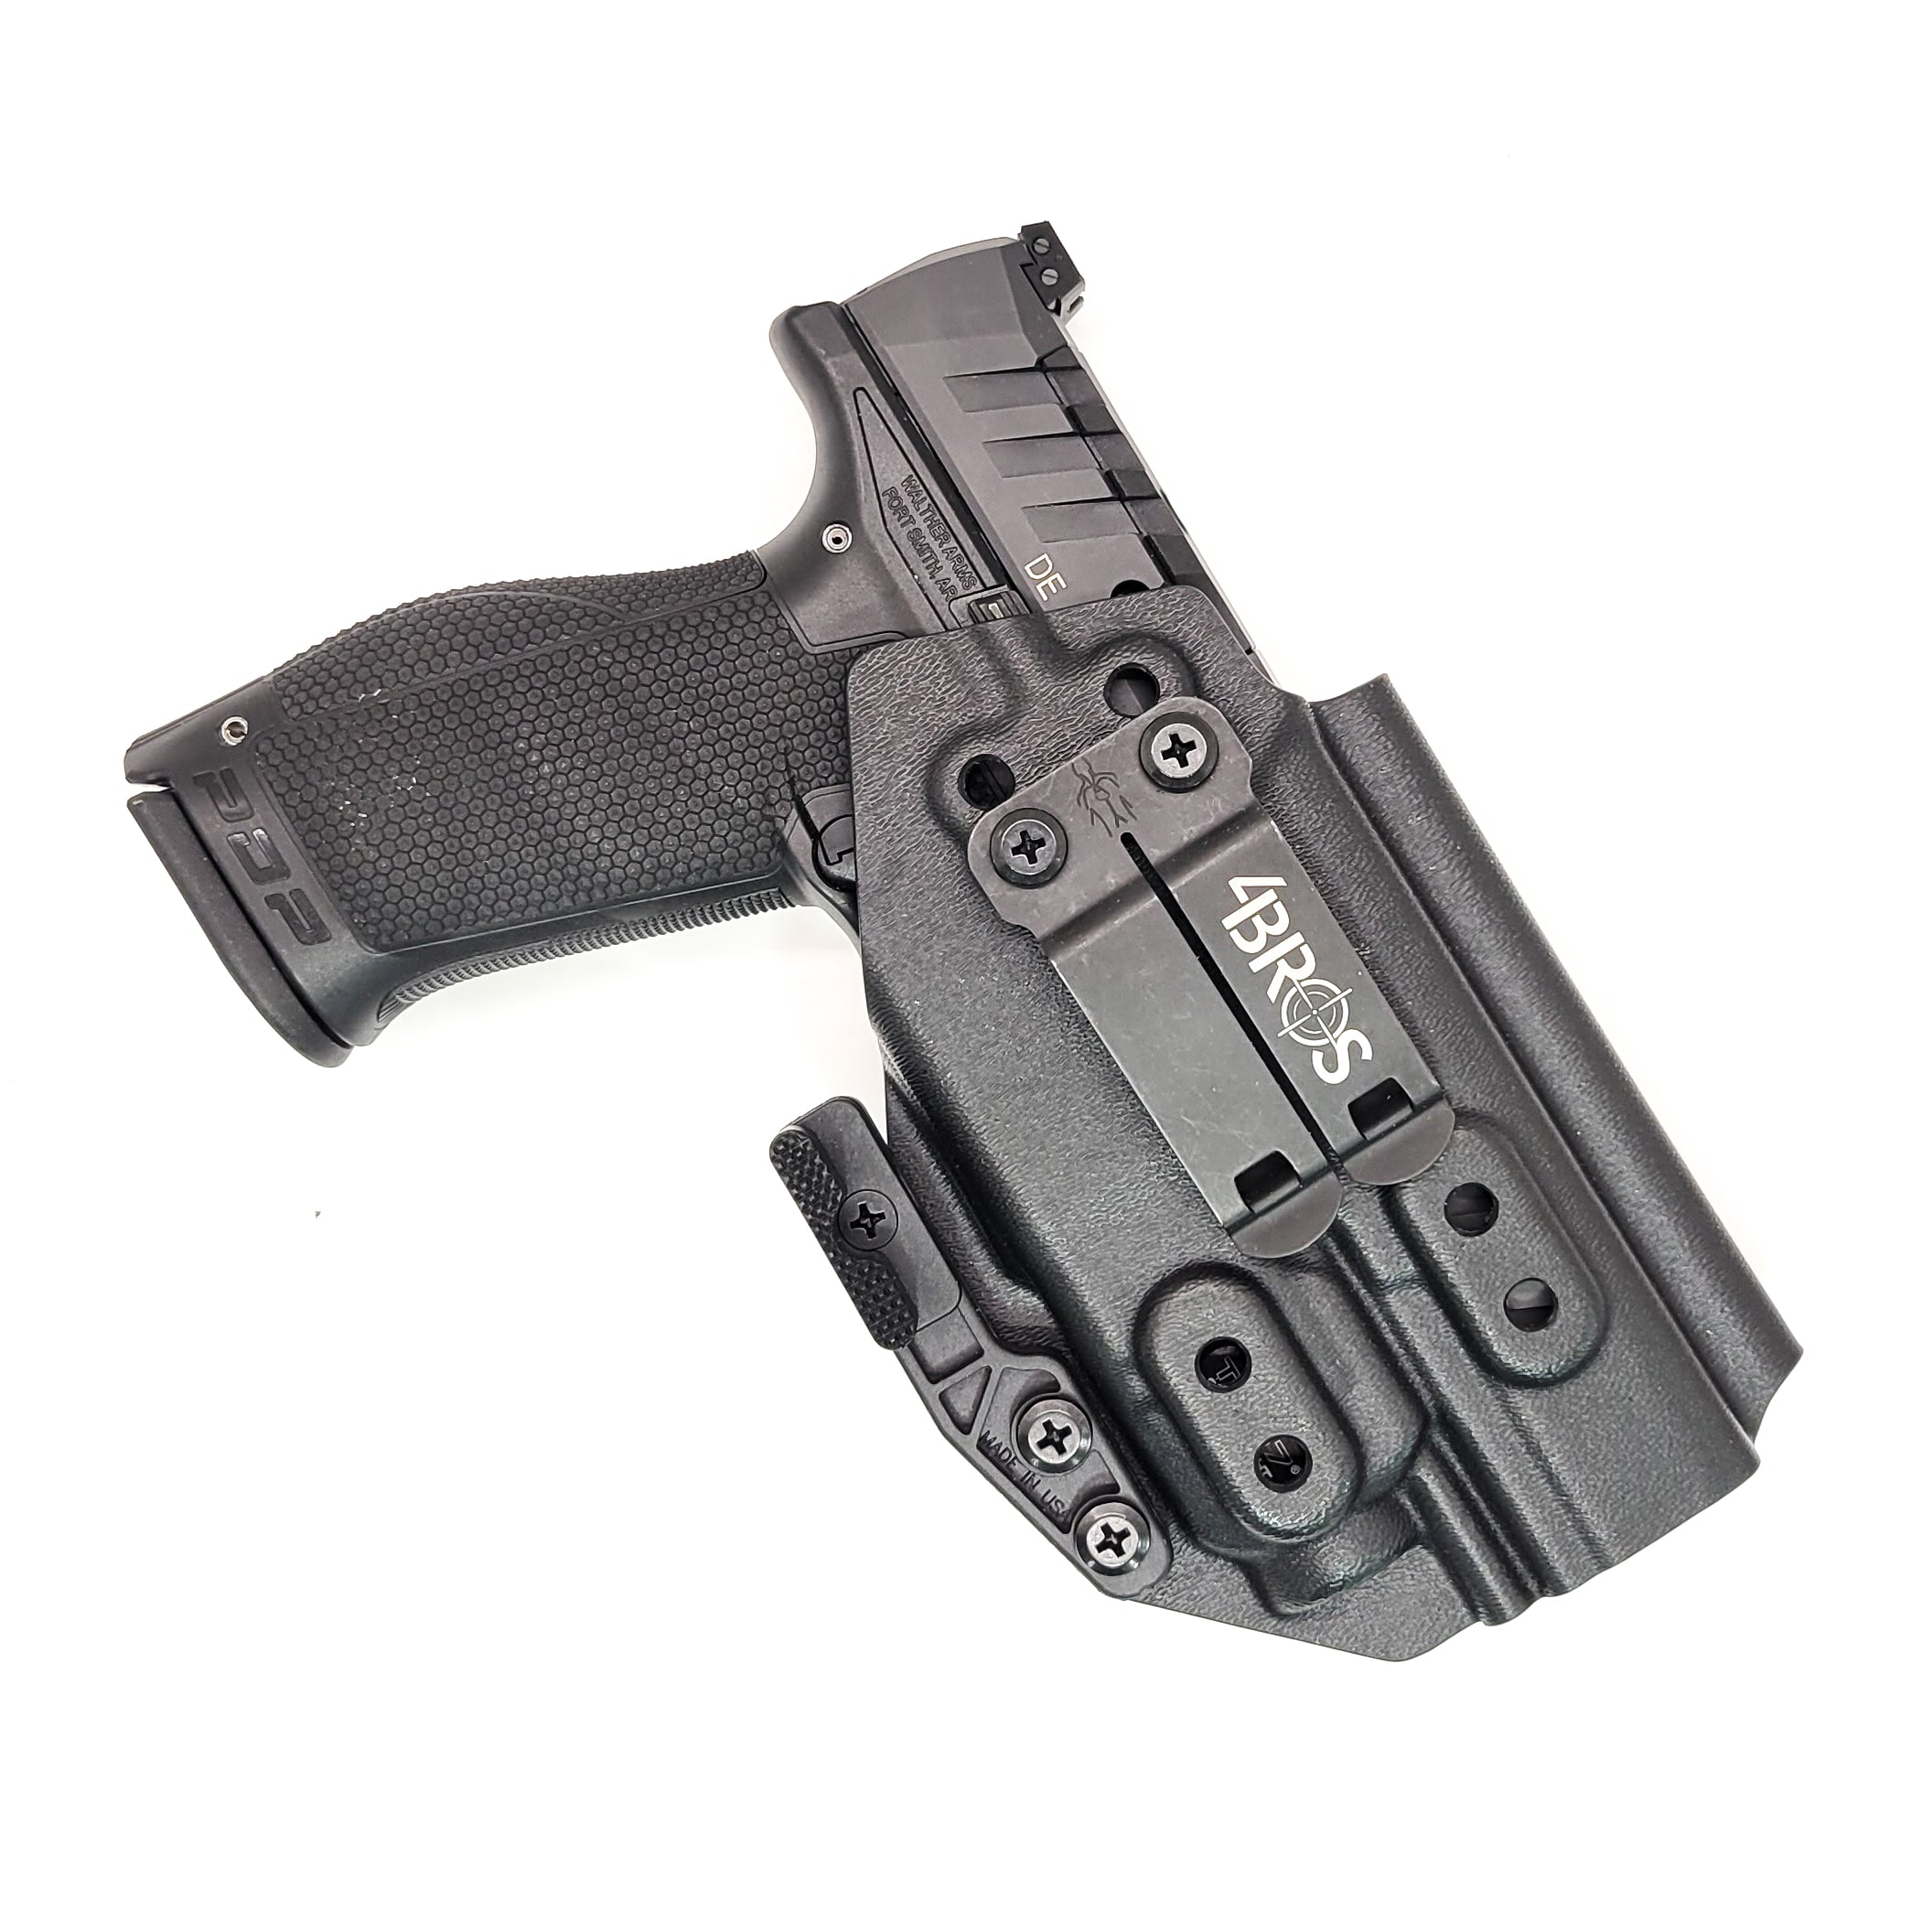 For the best concealed carry Inside Waistband IWB AIWB Holster designed to fit the Walther PDP Pro SD Compact 4" pistol and Streamlight TLR-7A or TLR-7 mounted on the firearm, shop Four Brothers Holsters. Cut for red dot sight, full sweat guard, adjustable retention & open muzzle for threaded barrels & compensators. 